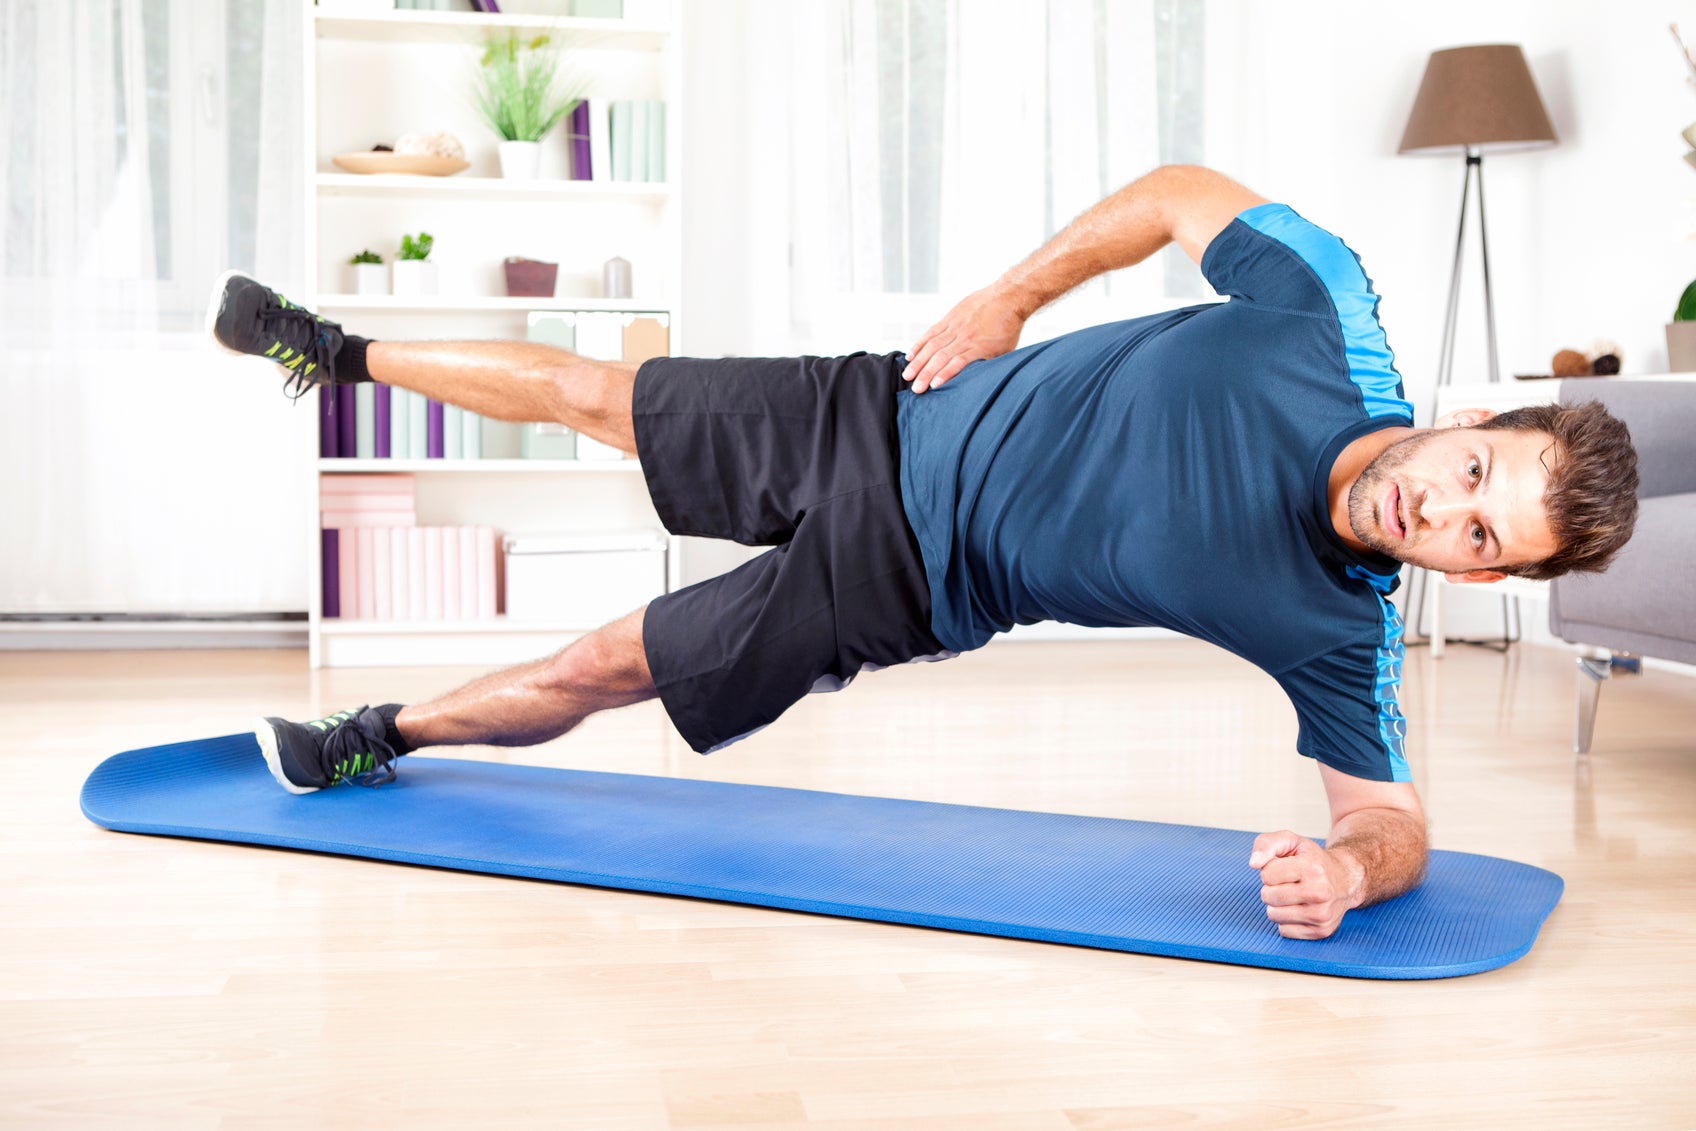 A variation on the plank, which is one of the key exercises in this three-minute workout